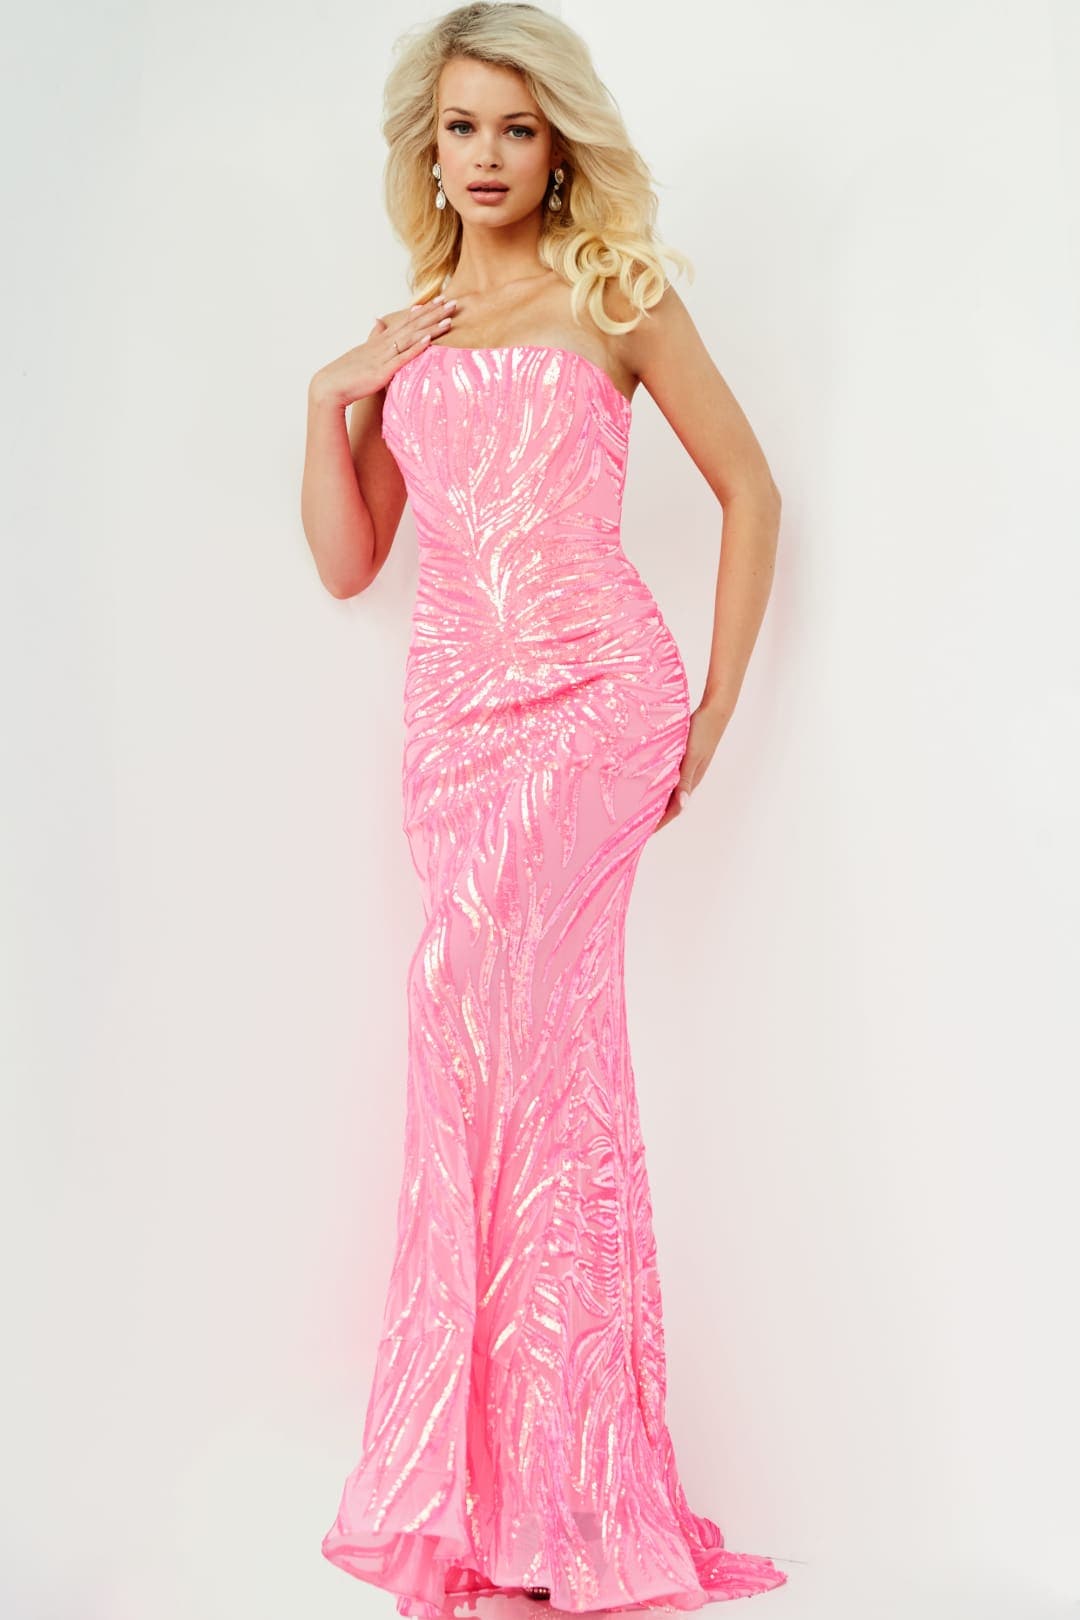 Jovani 05664 One Shoulder Iridescent Sequin Fitted Prom Dress - NEON PINK / Dress